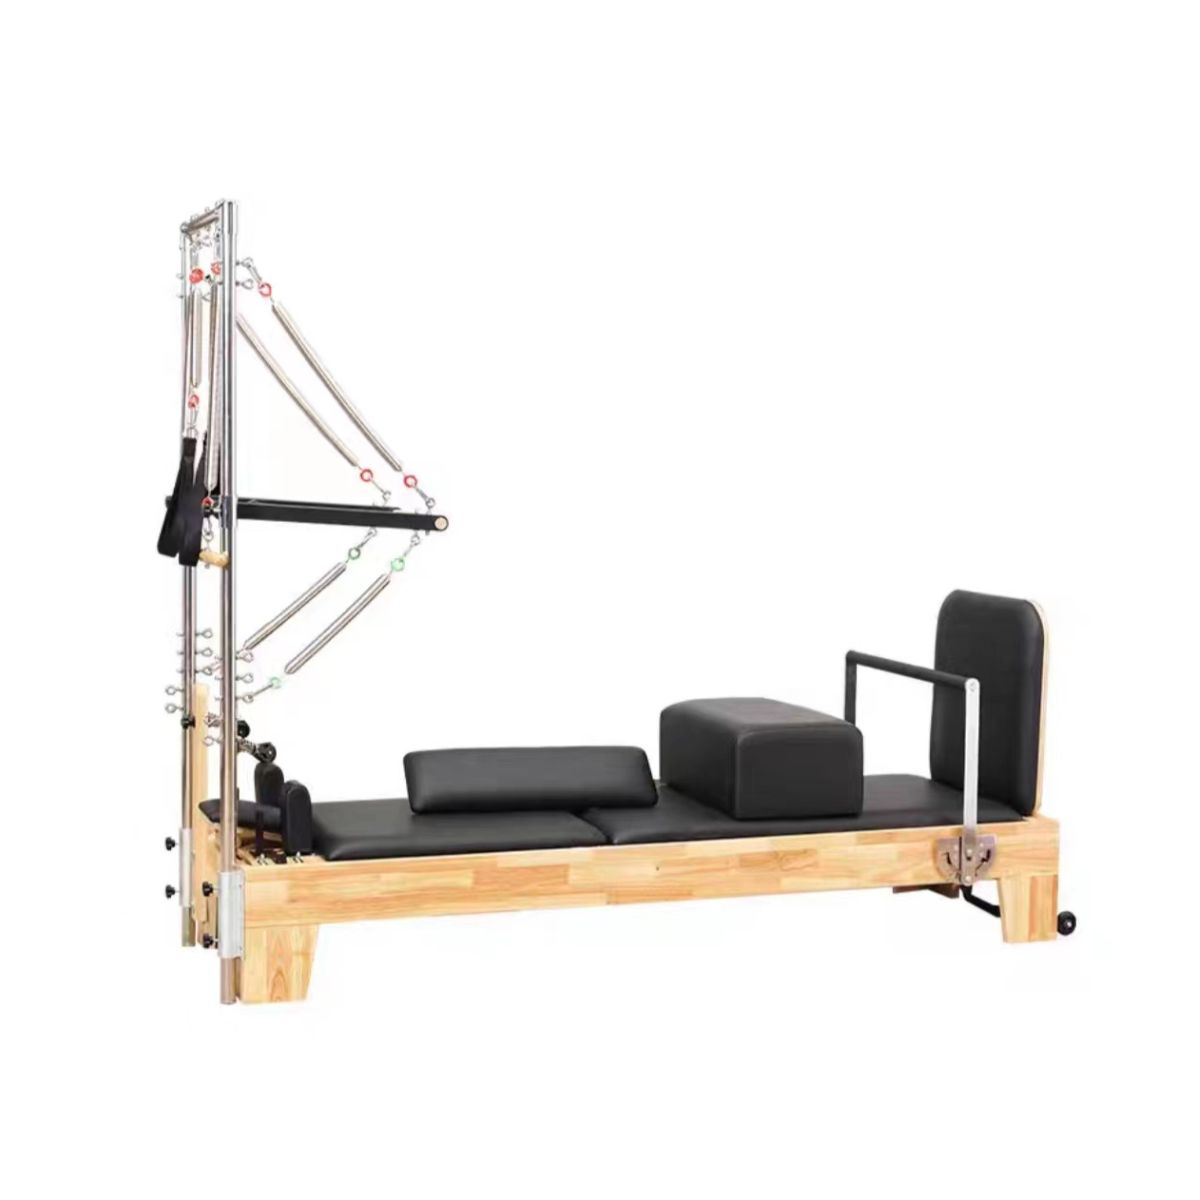 Pilates Reformer Exercise Equipment with Tower Fitness Equipment